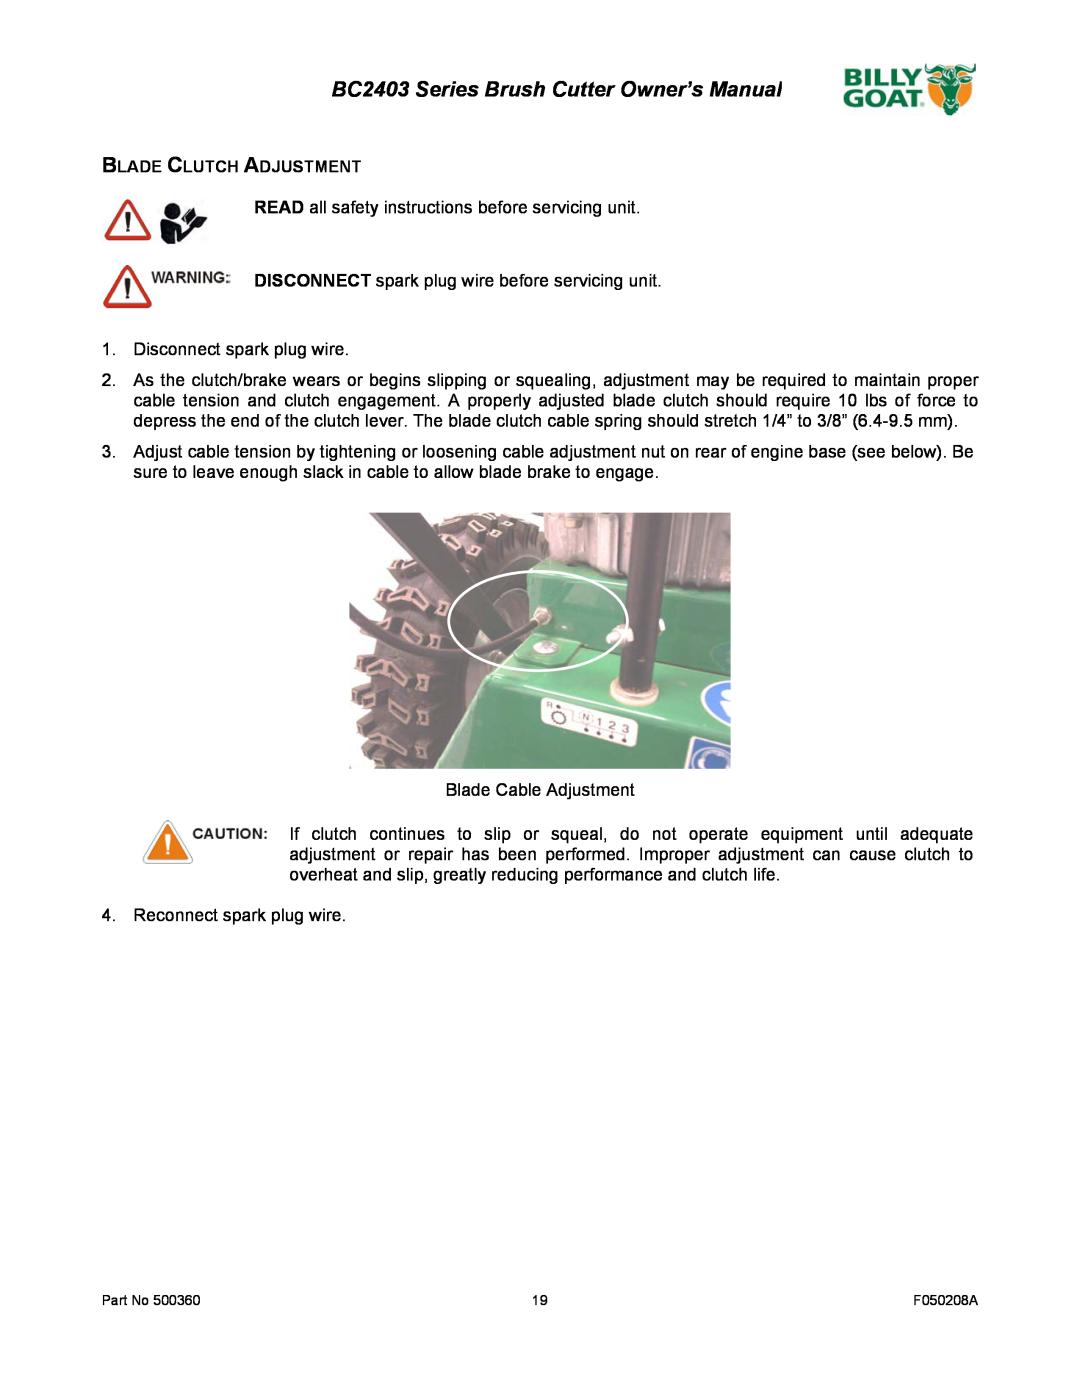 Billy Goat BC2403 Series owner manual Blade Clutch Adjustment 